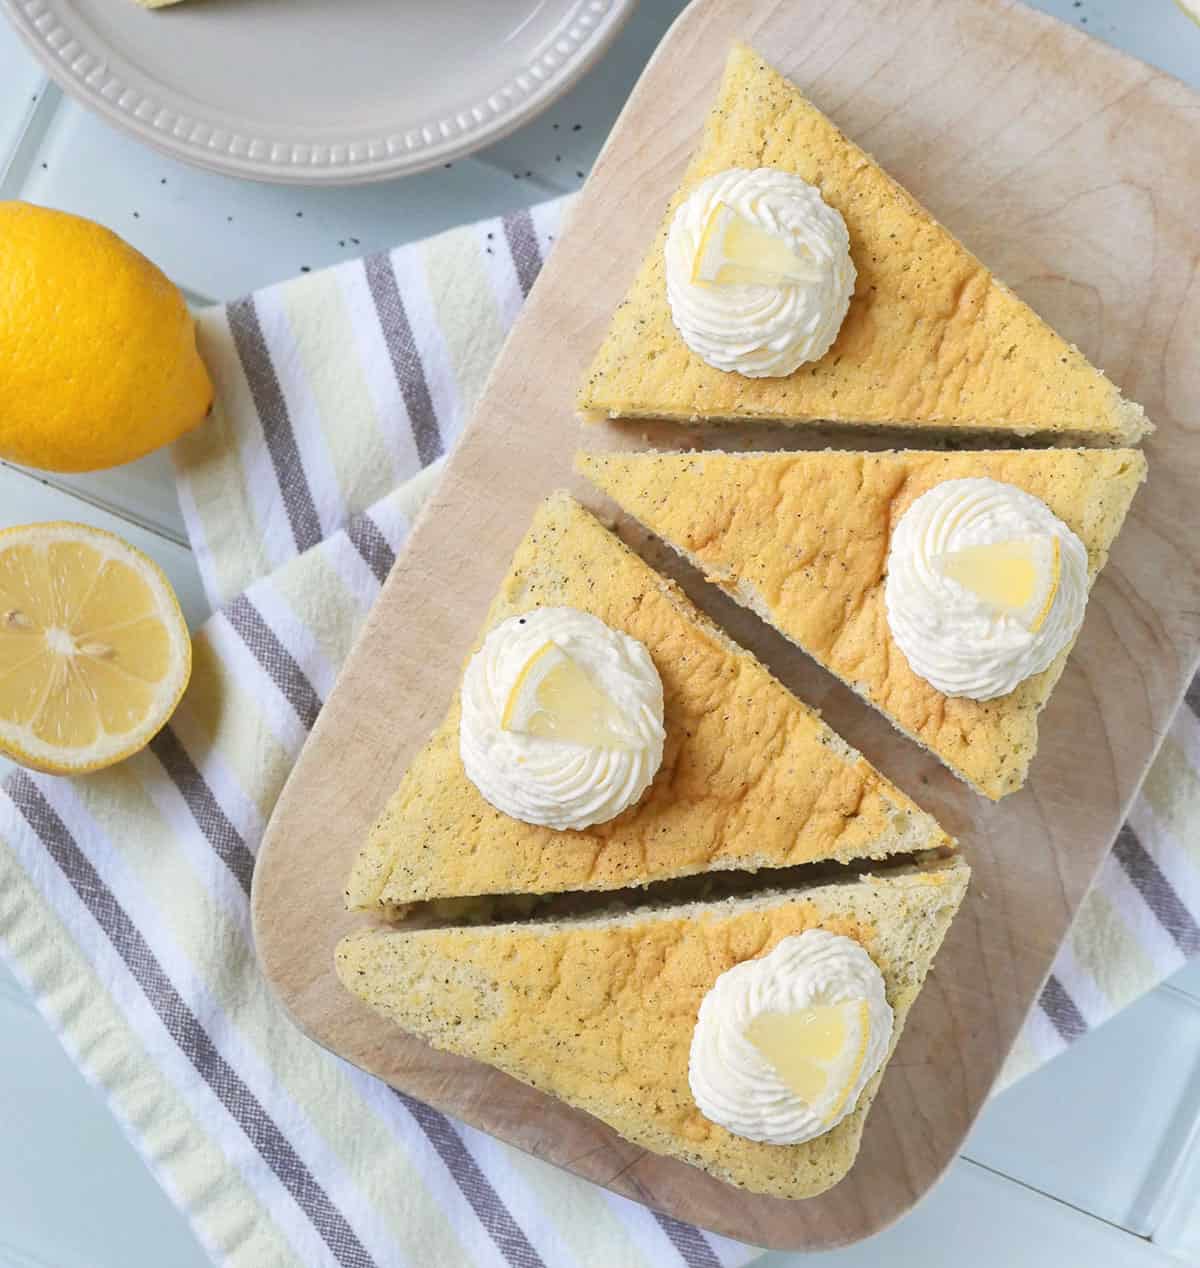 Earl Grey Japanese cheesecake slices on a cutting board.